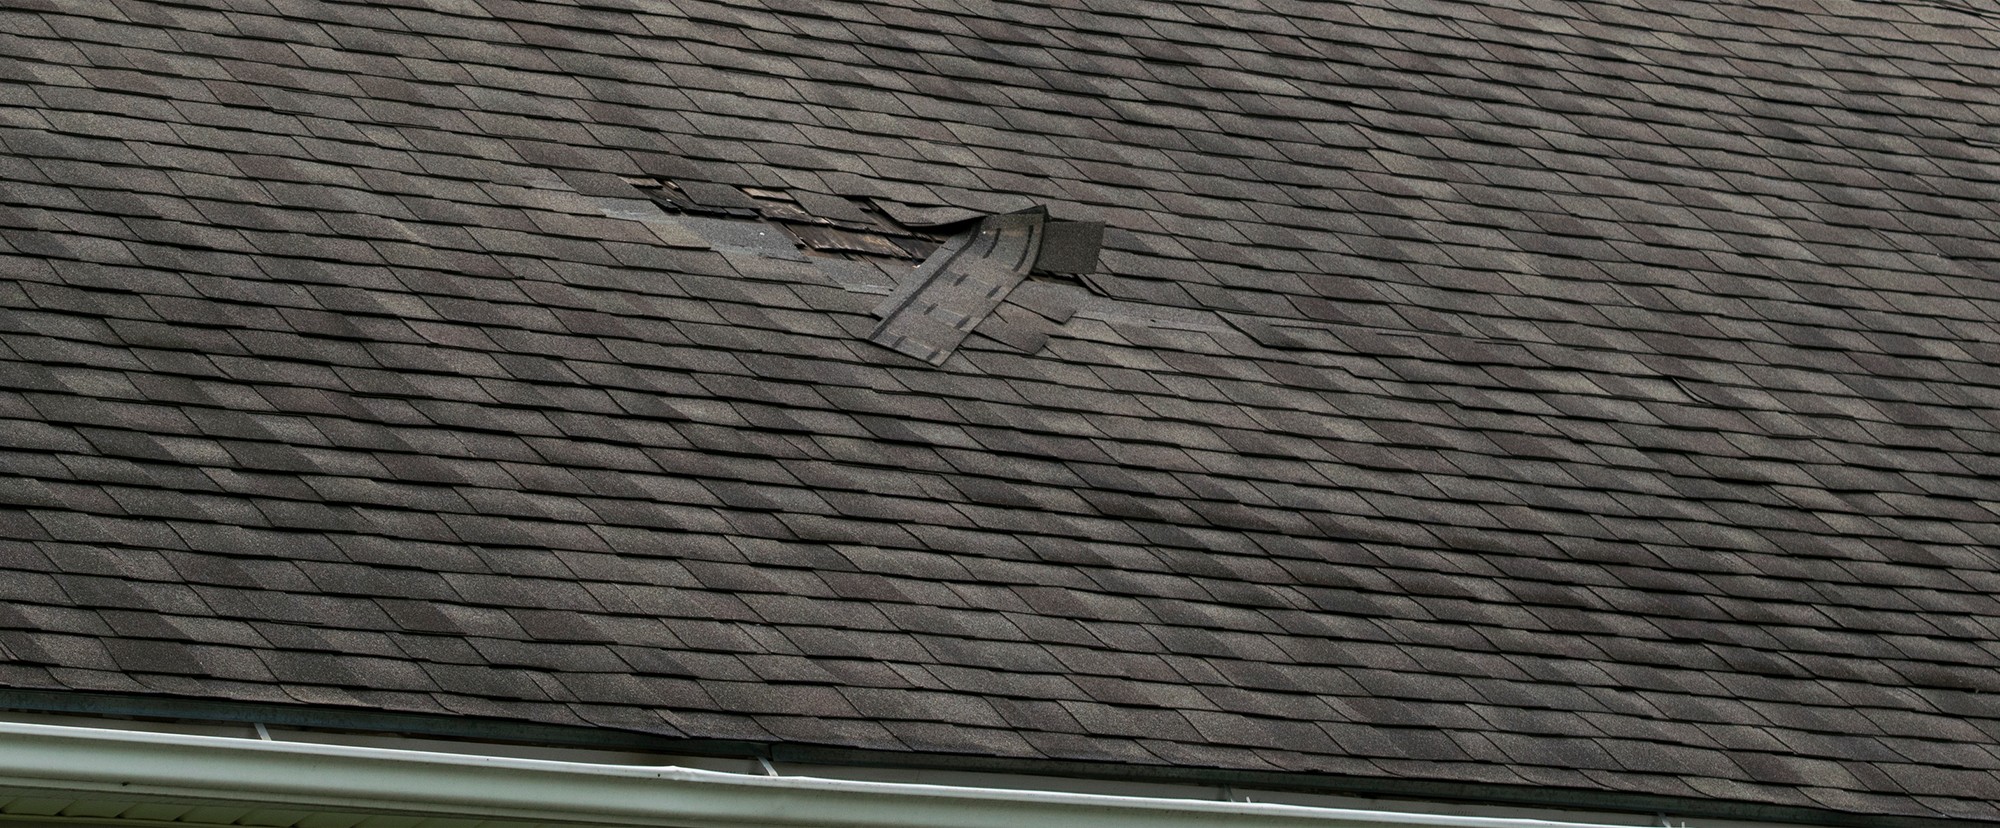 Damaged roof shinlges on roof in Indianapolis